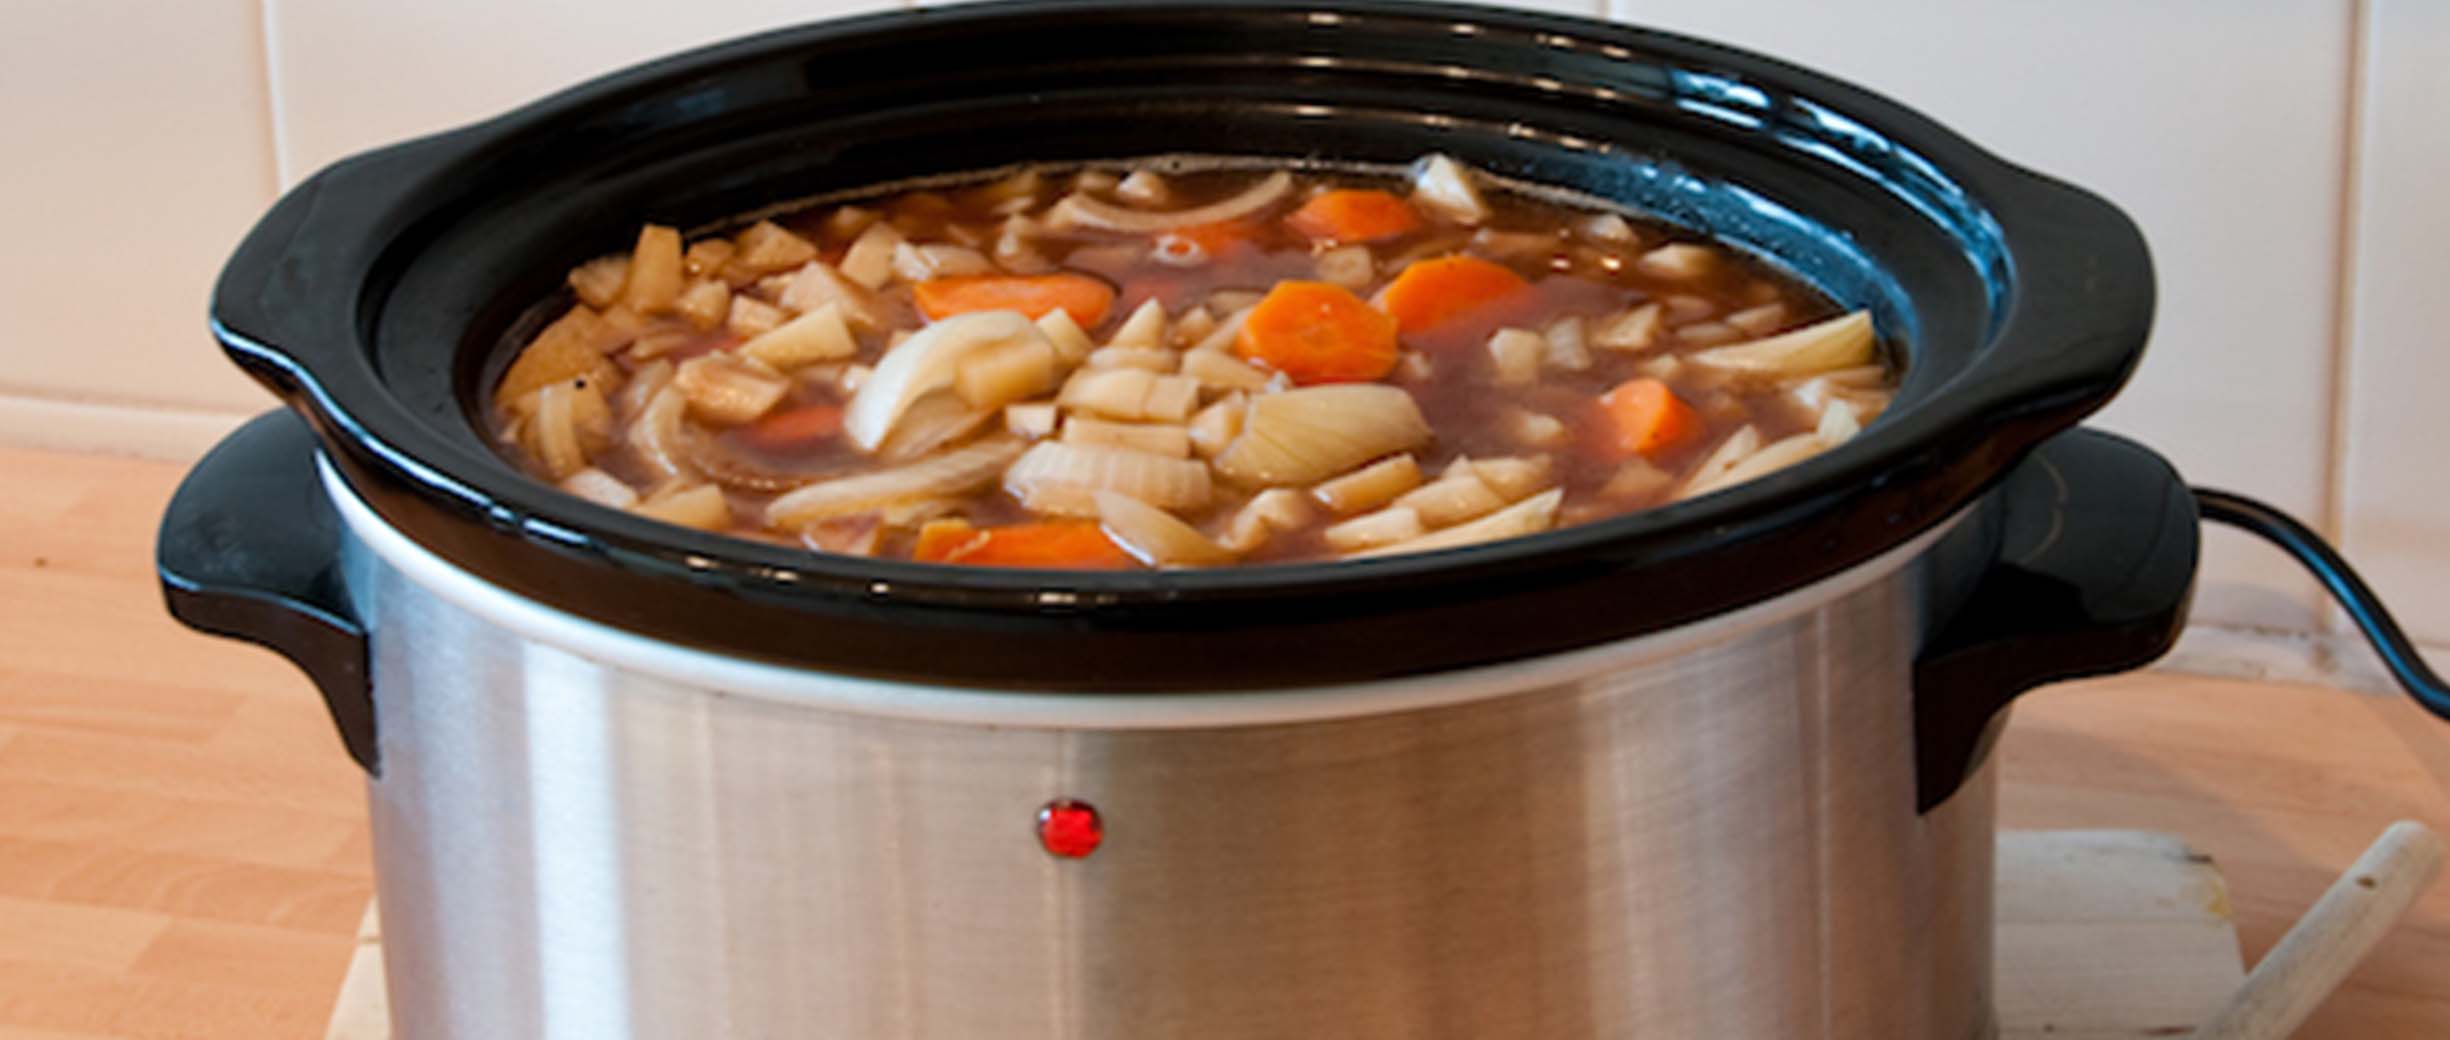 10 Slow Cooker Recipes Your Kids Will Love